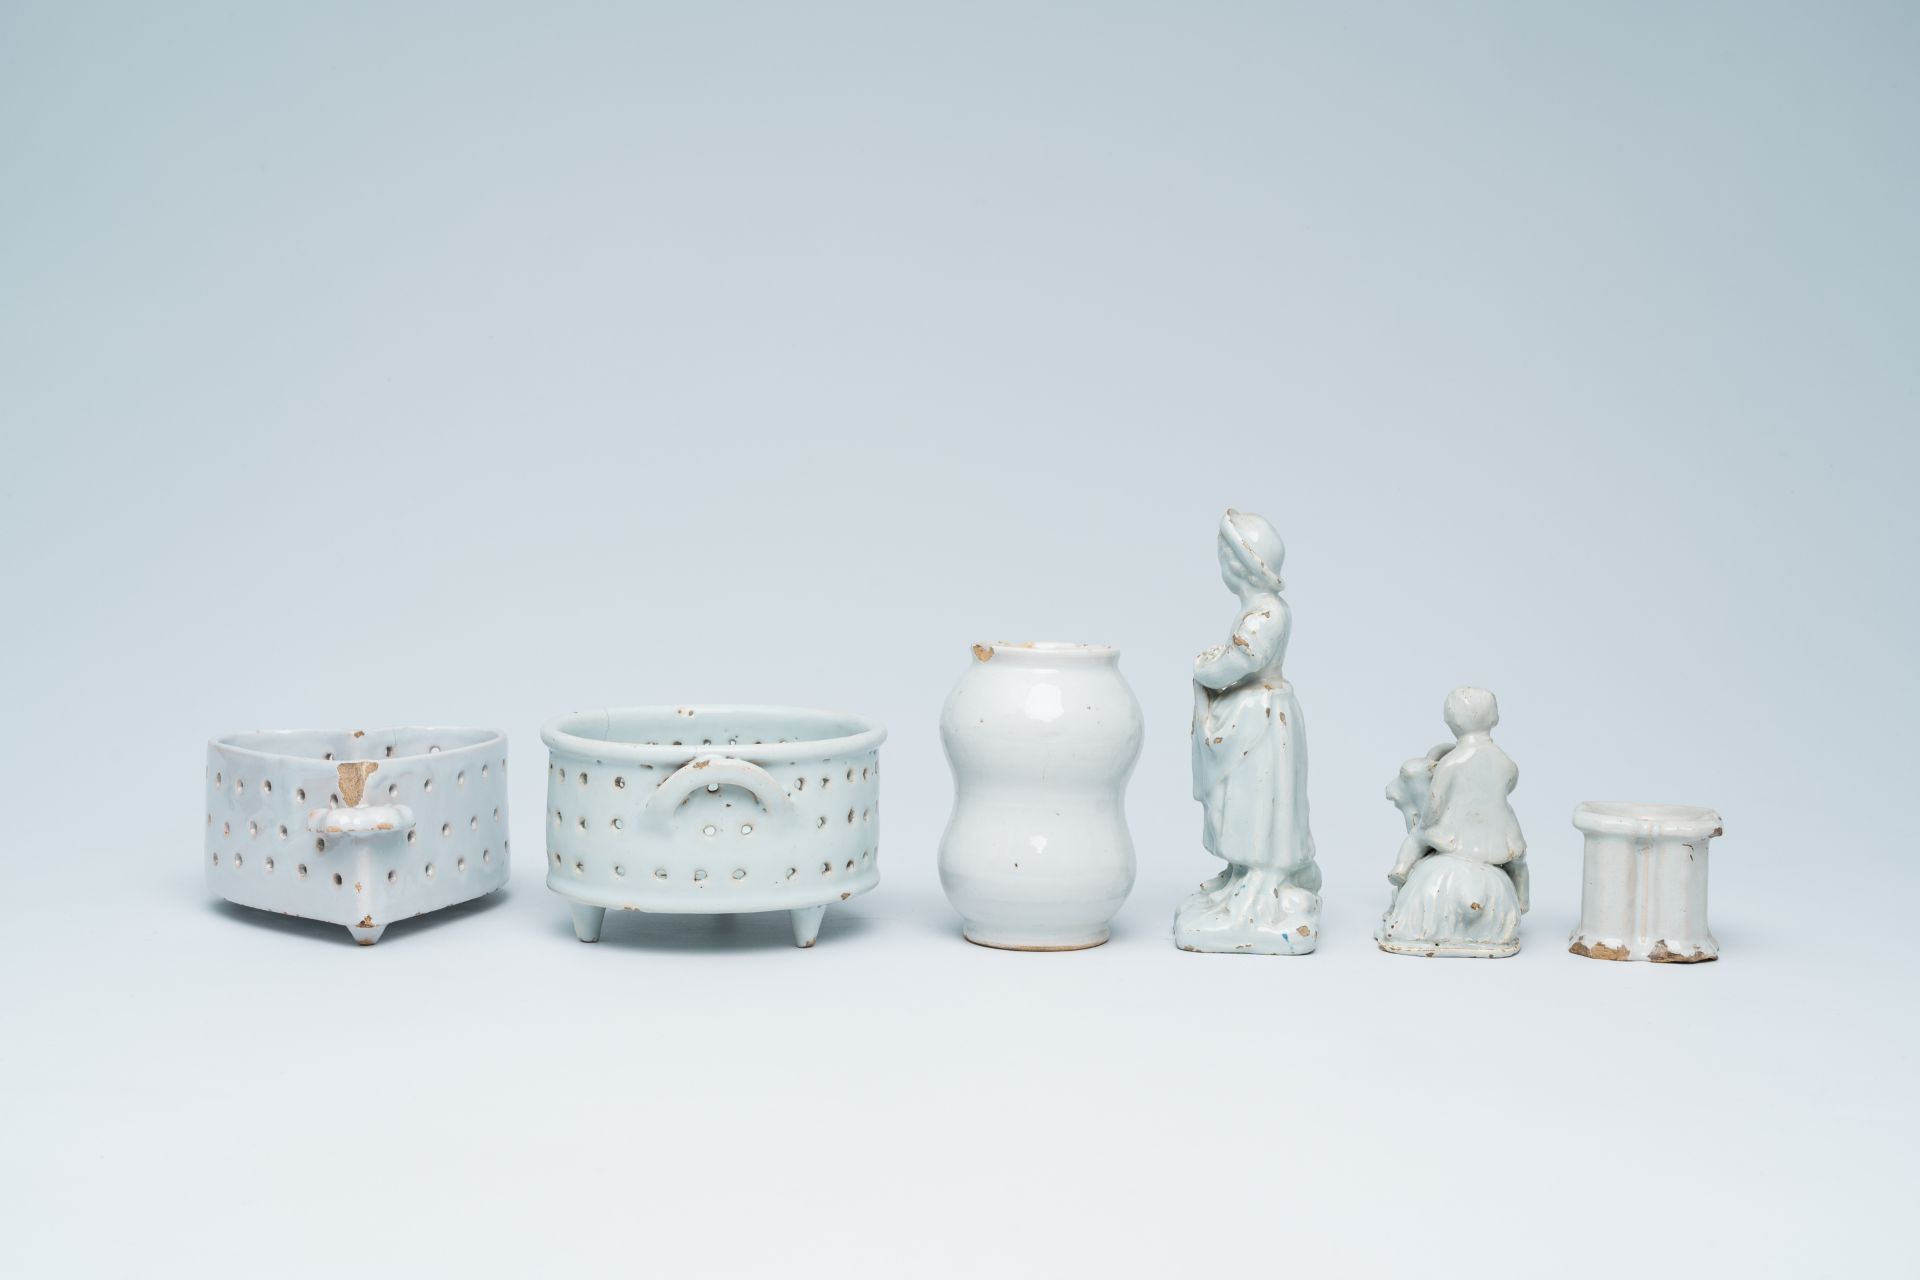 Six monochrome white Delftware pieces, The Netherlands and France, 18th/19th C. - Image 5 of 7